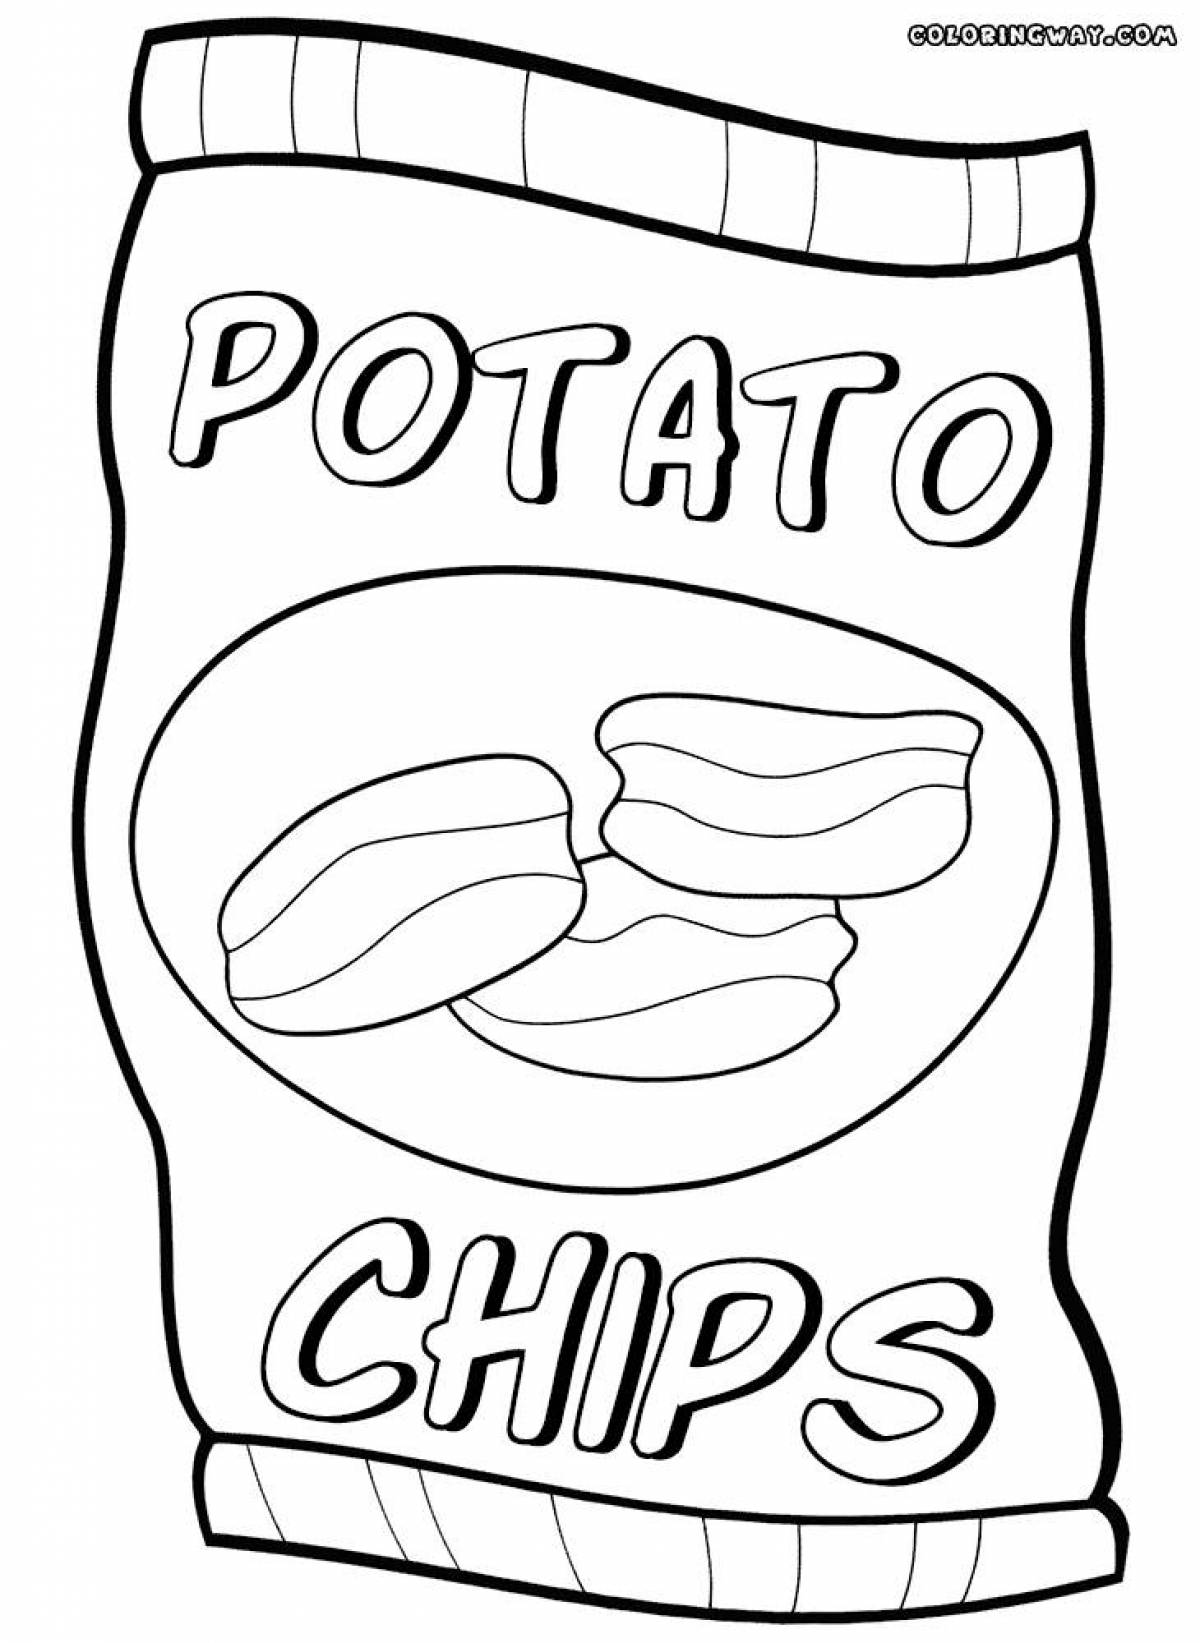 Colored holiday chips coloring book